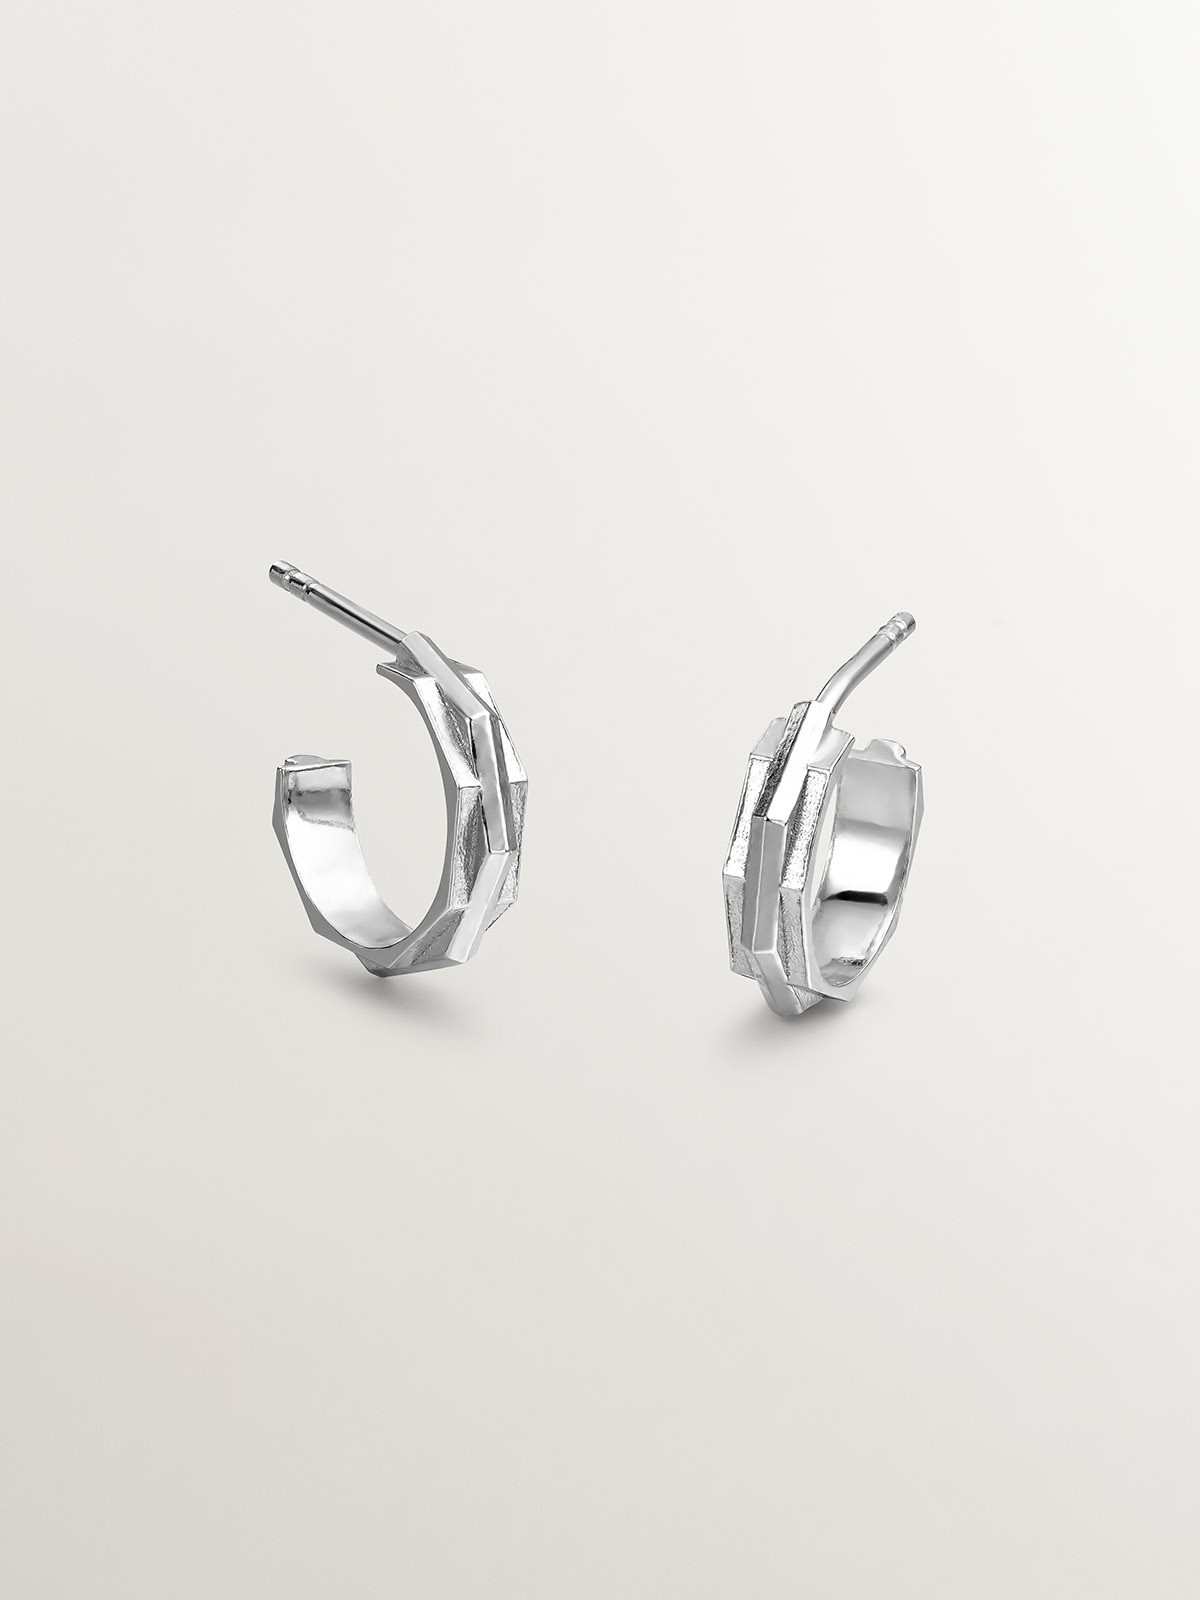 925 silver ring earrings with geometric finish